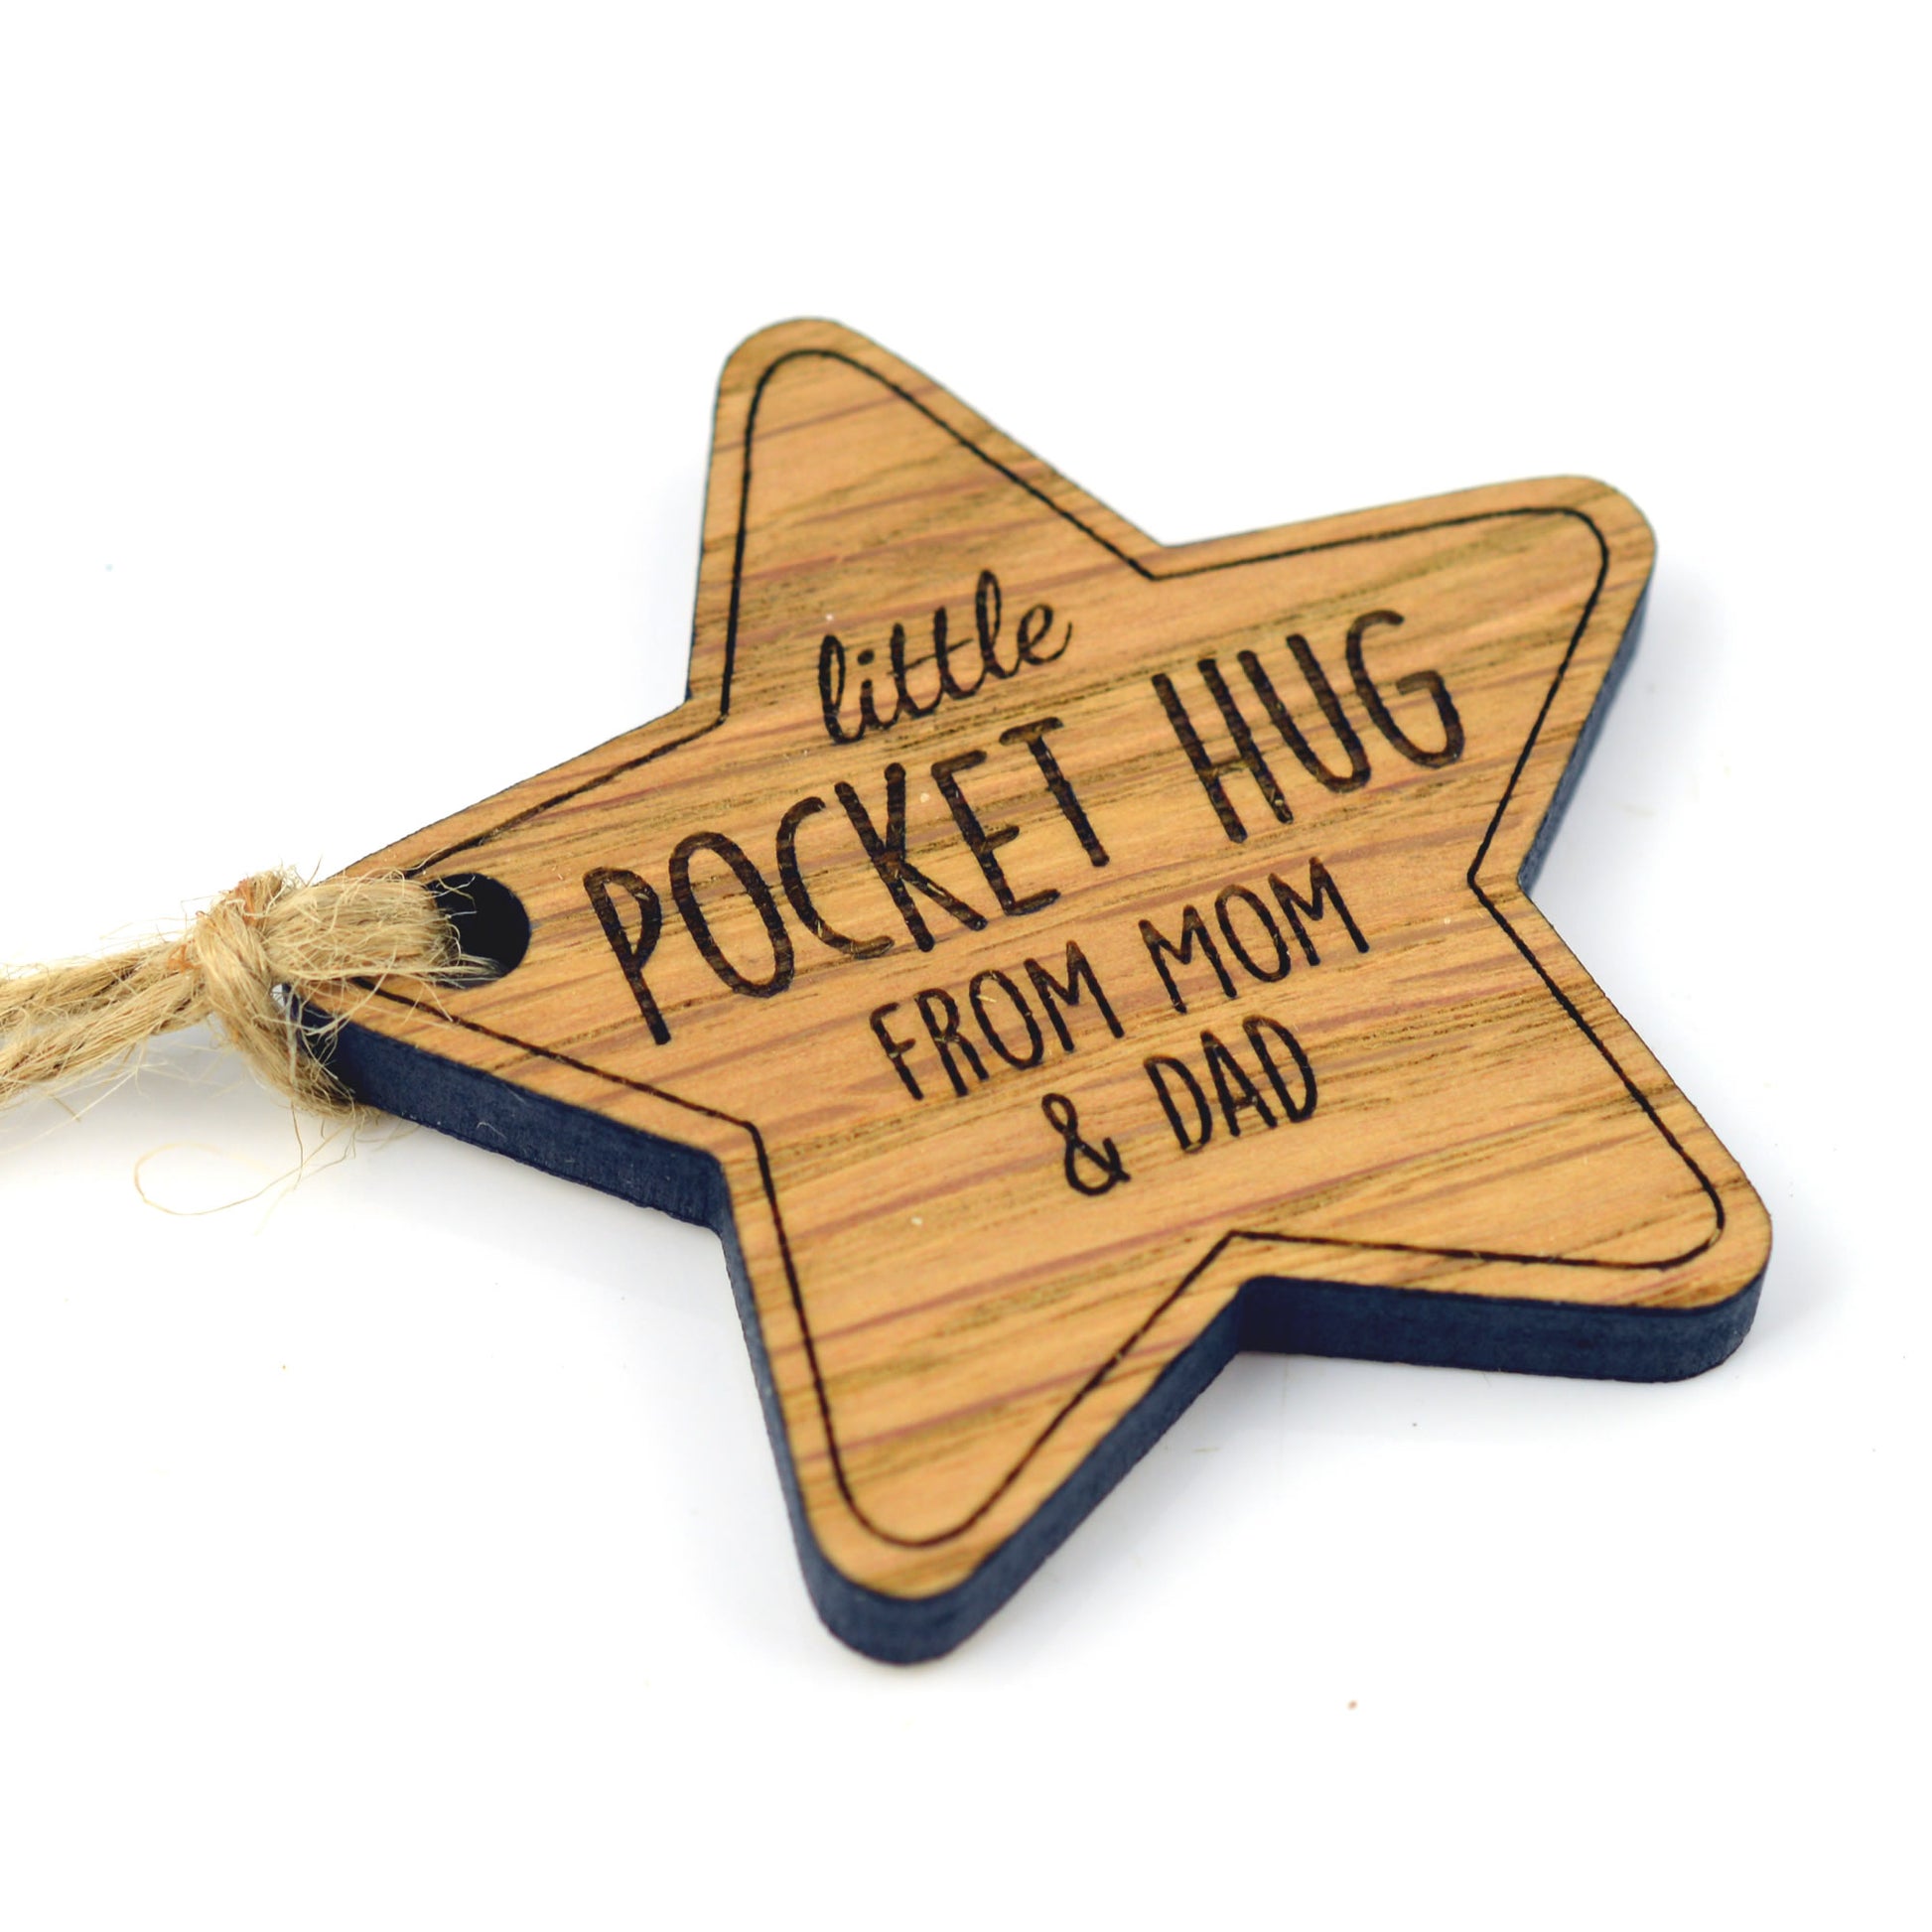 A Little Pocket Hug Engraved Token First Day Of School Gift